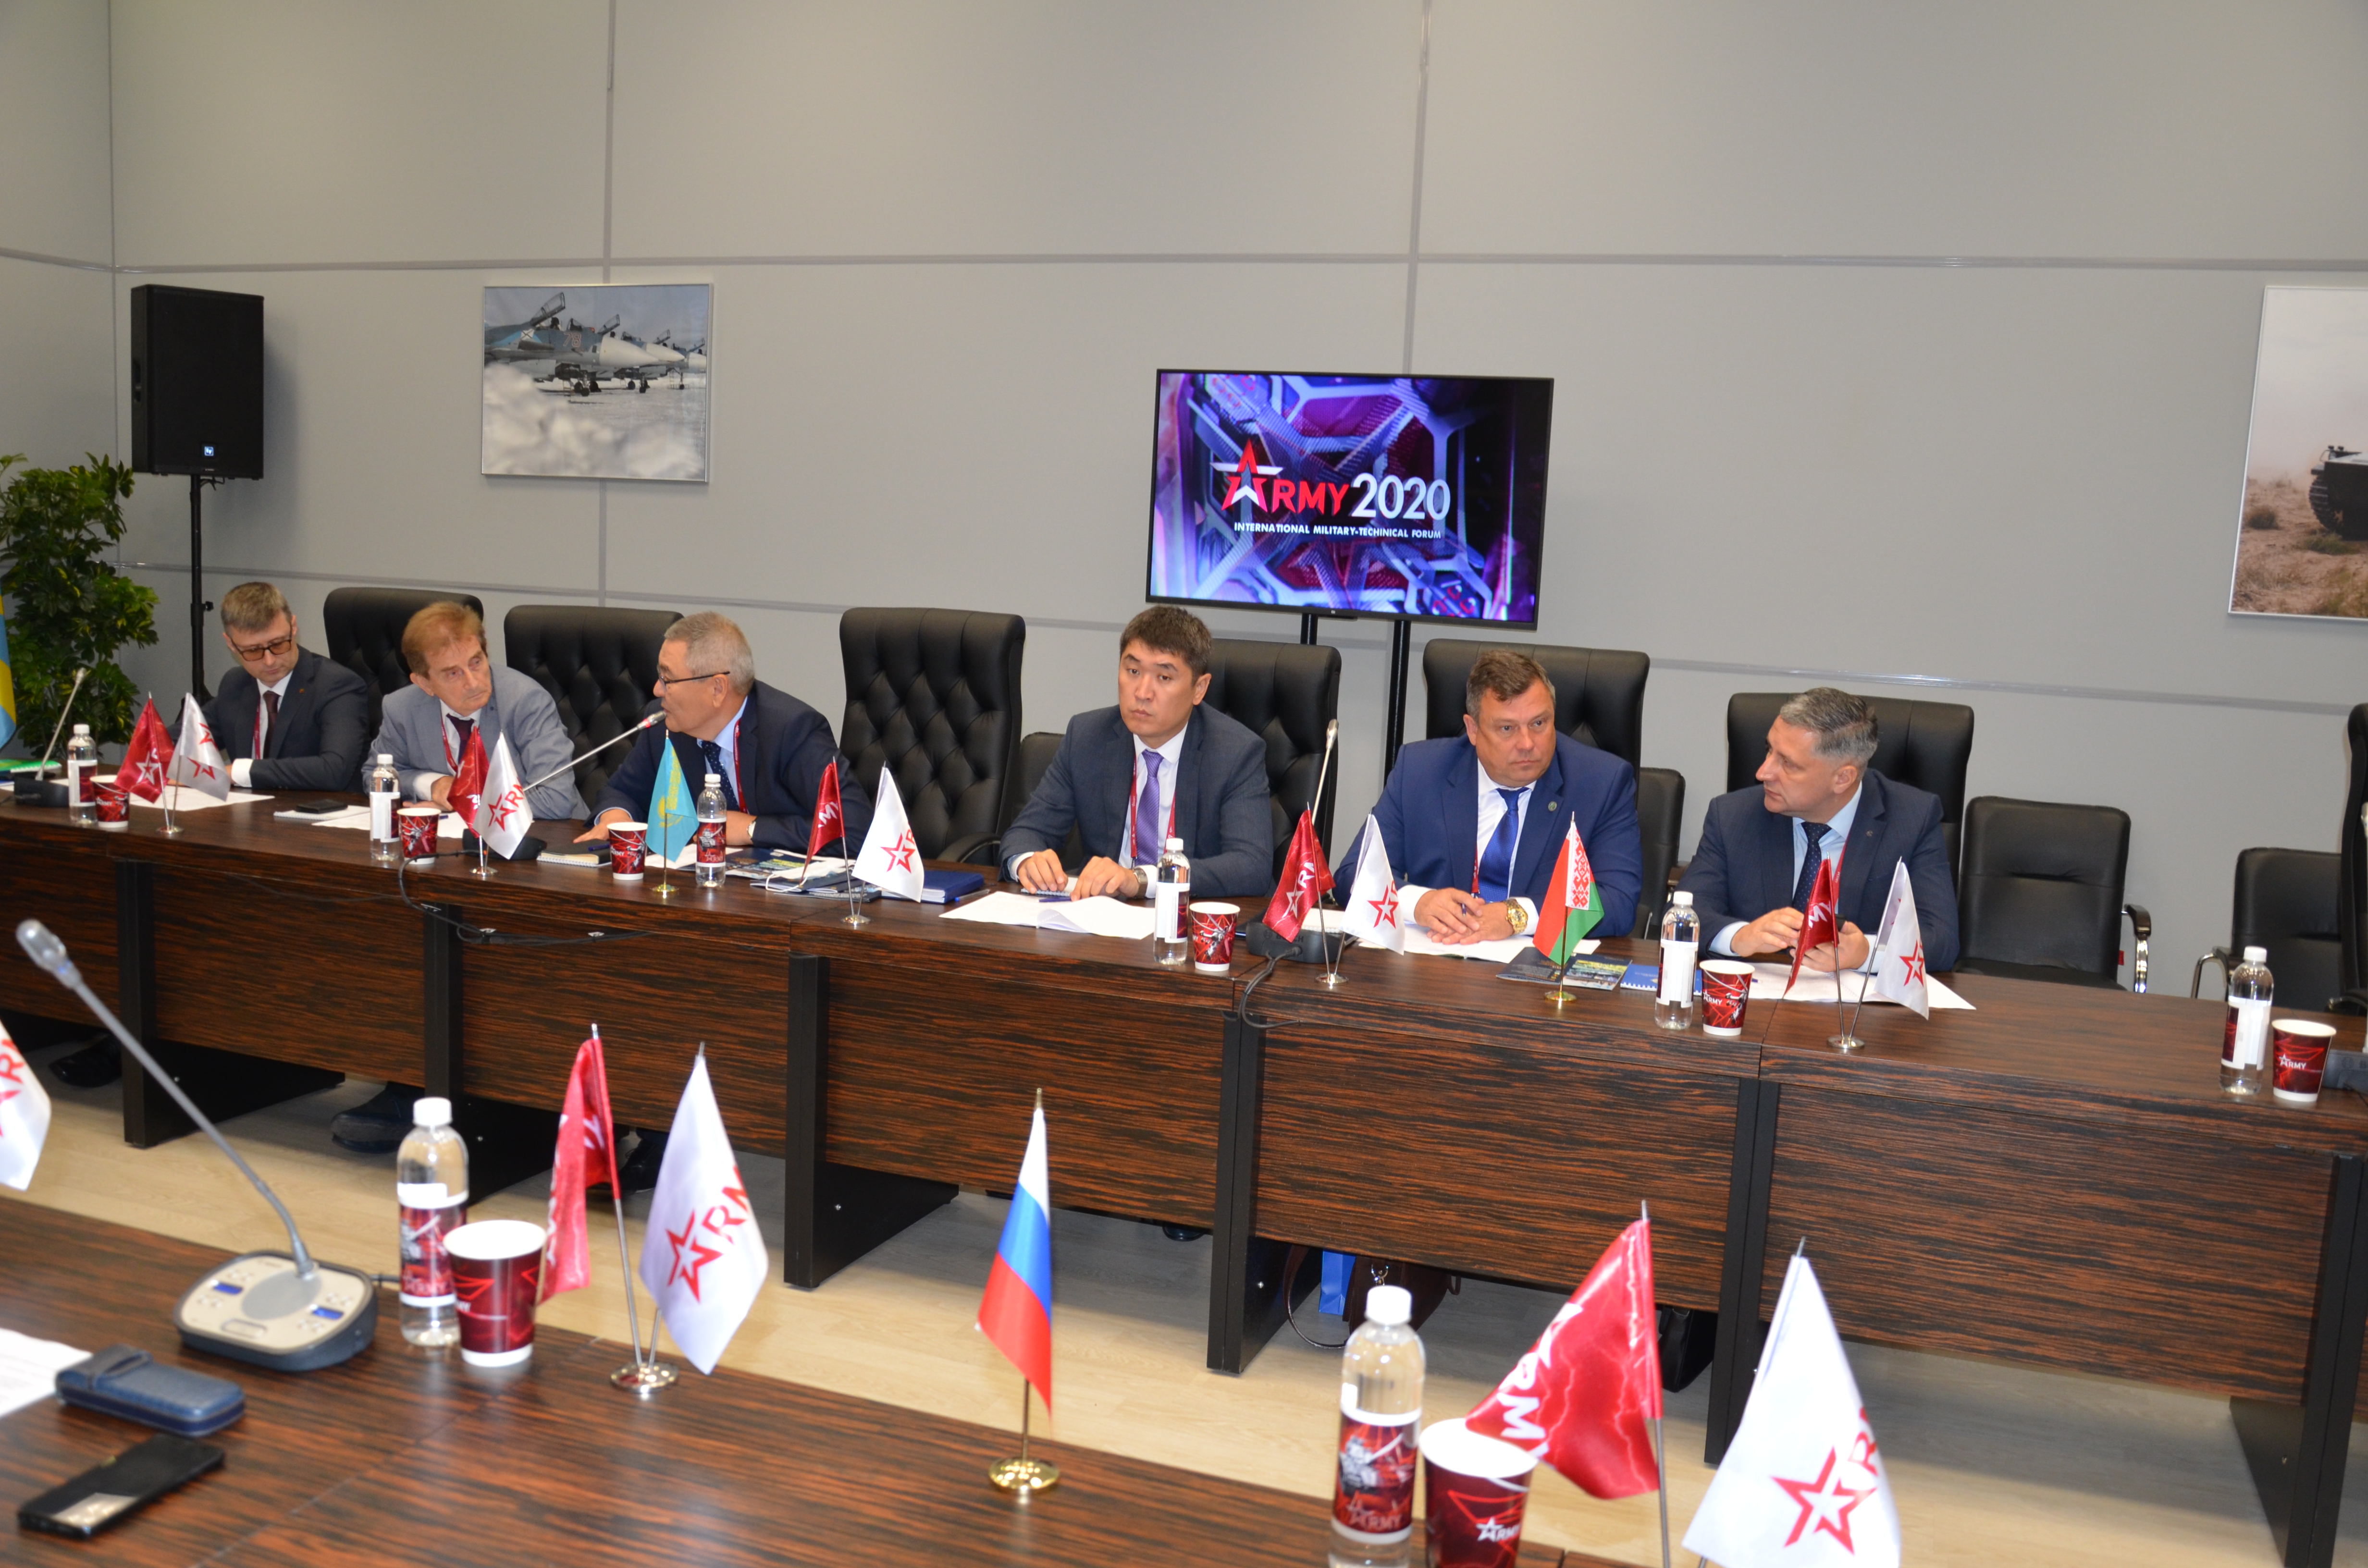 The XII-th meeting of the Coordination Council of Authorized Bodies of the CSTO Member States on advertising and exhibition activities was held within the framework of the “ARMY- 2020” Forum